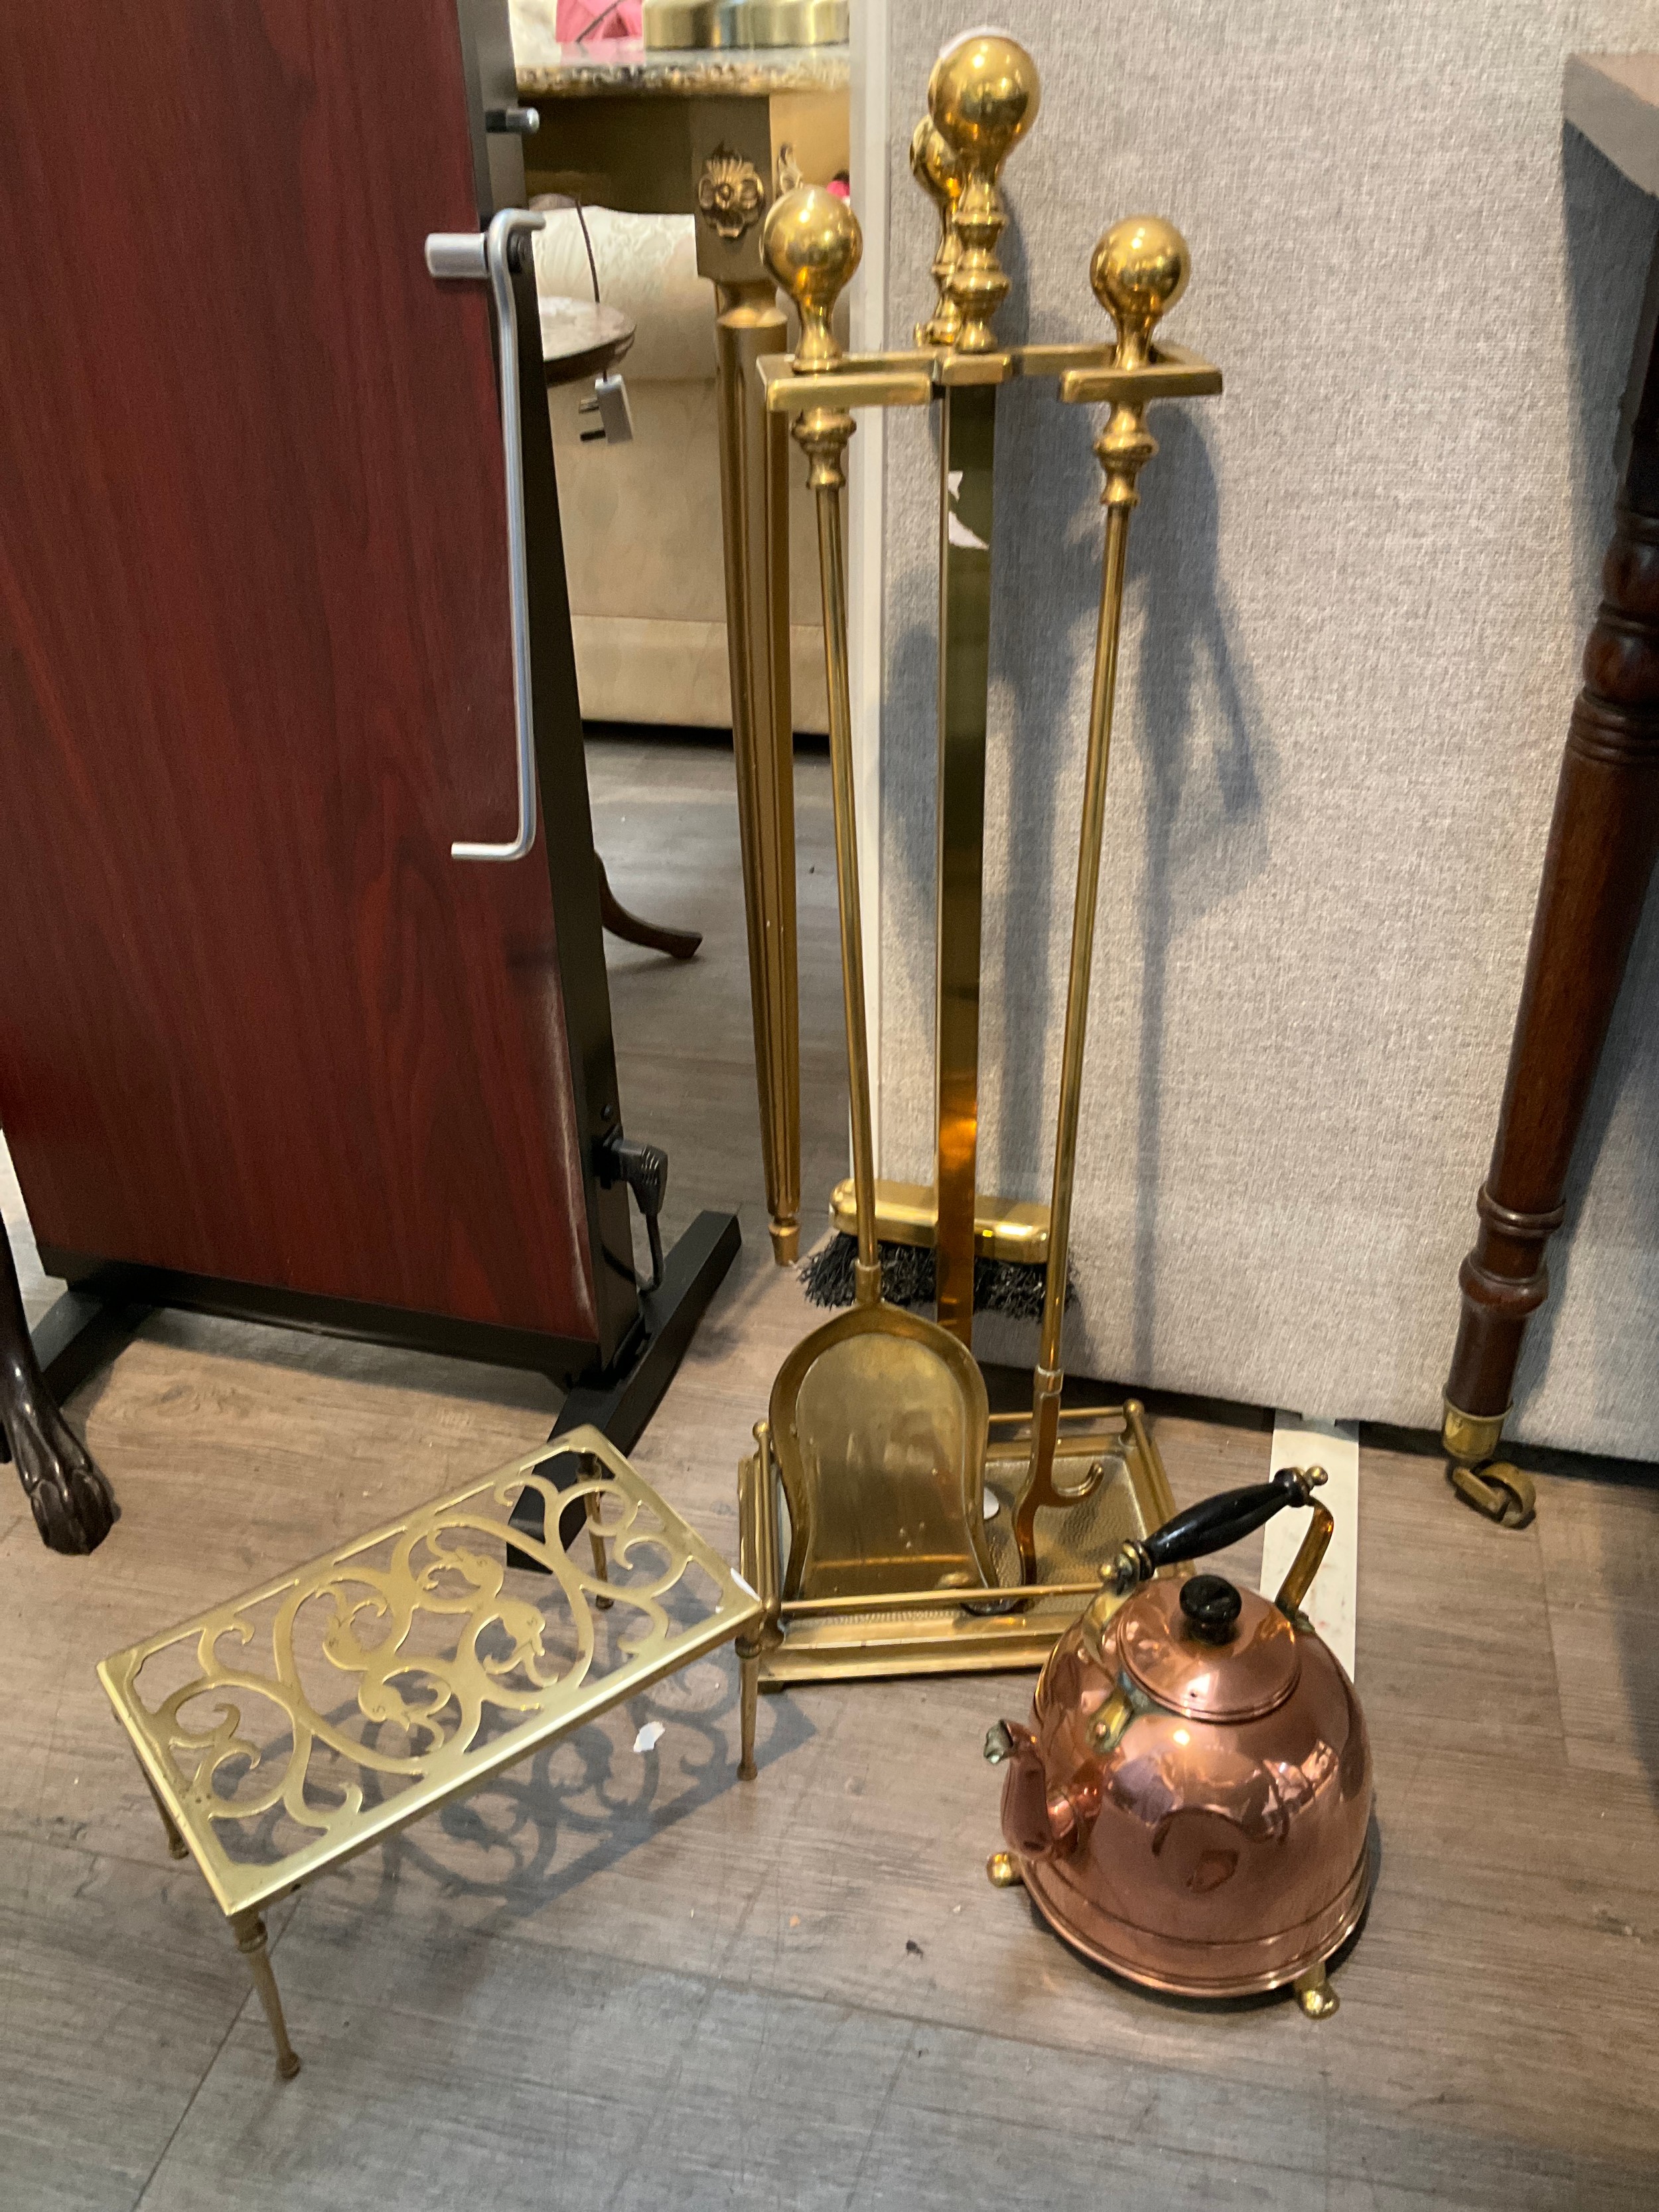 A brass companion set with stand, brass trivet and copper kettle (dented)